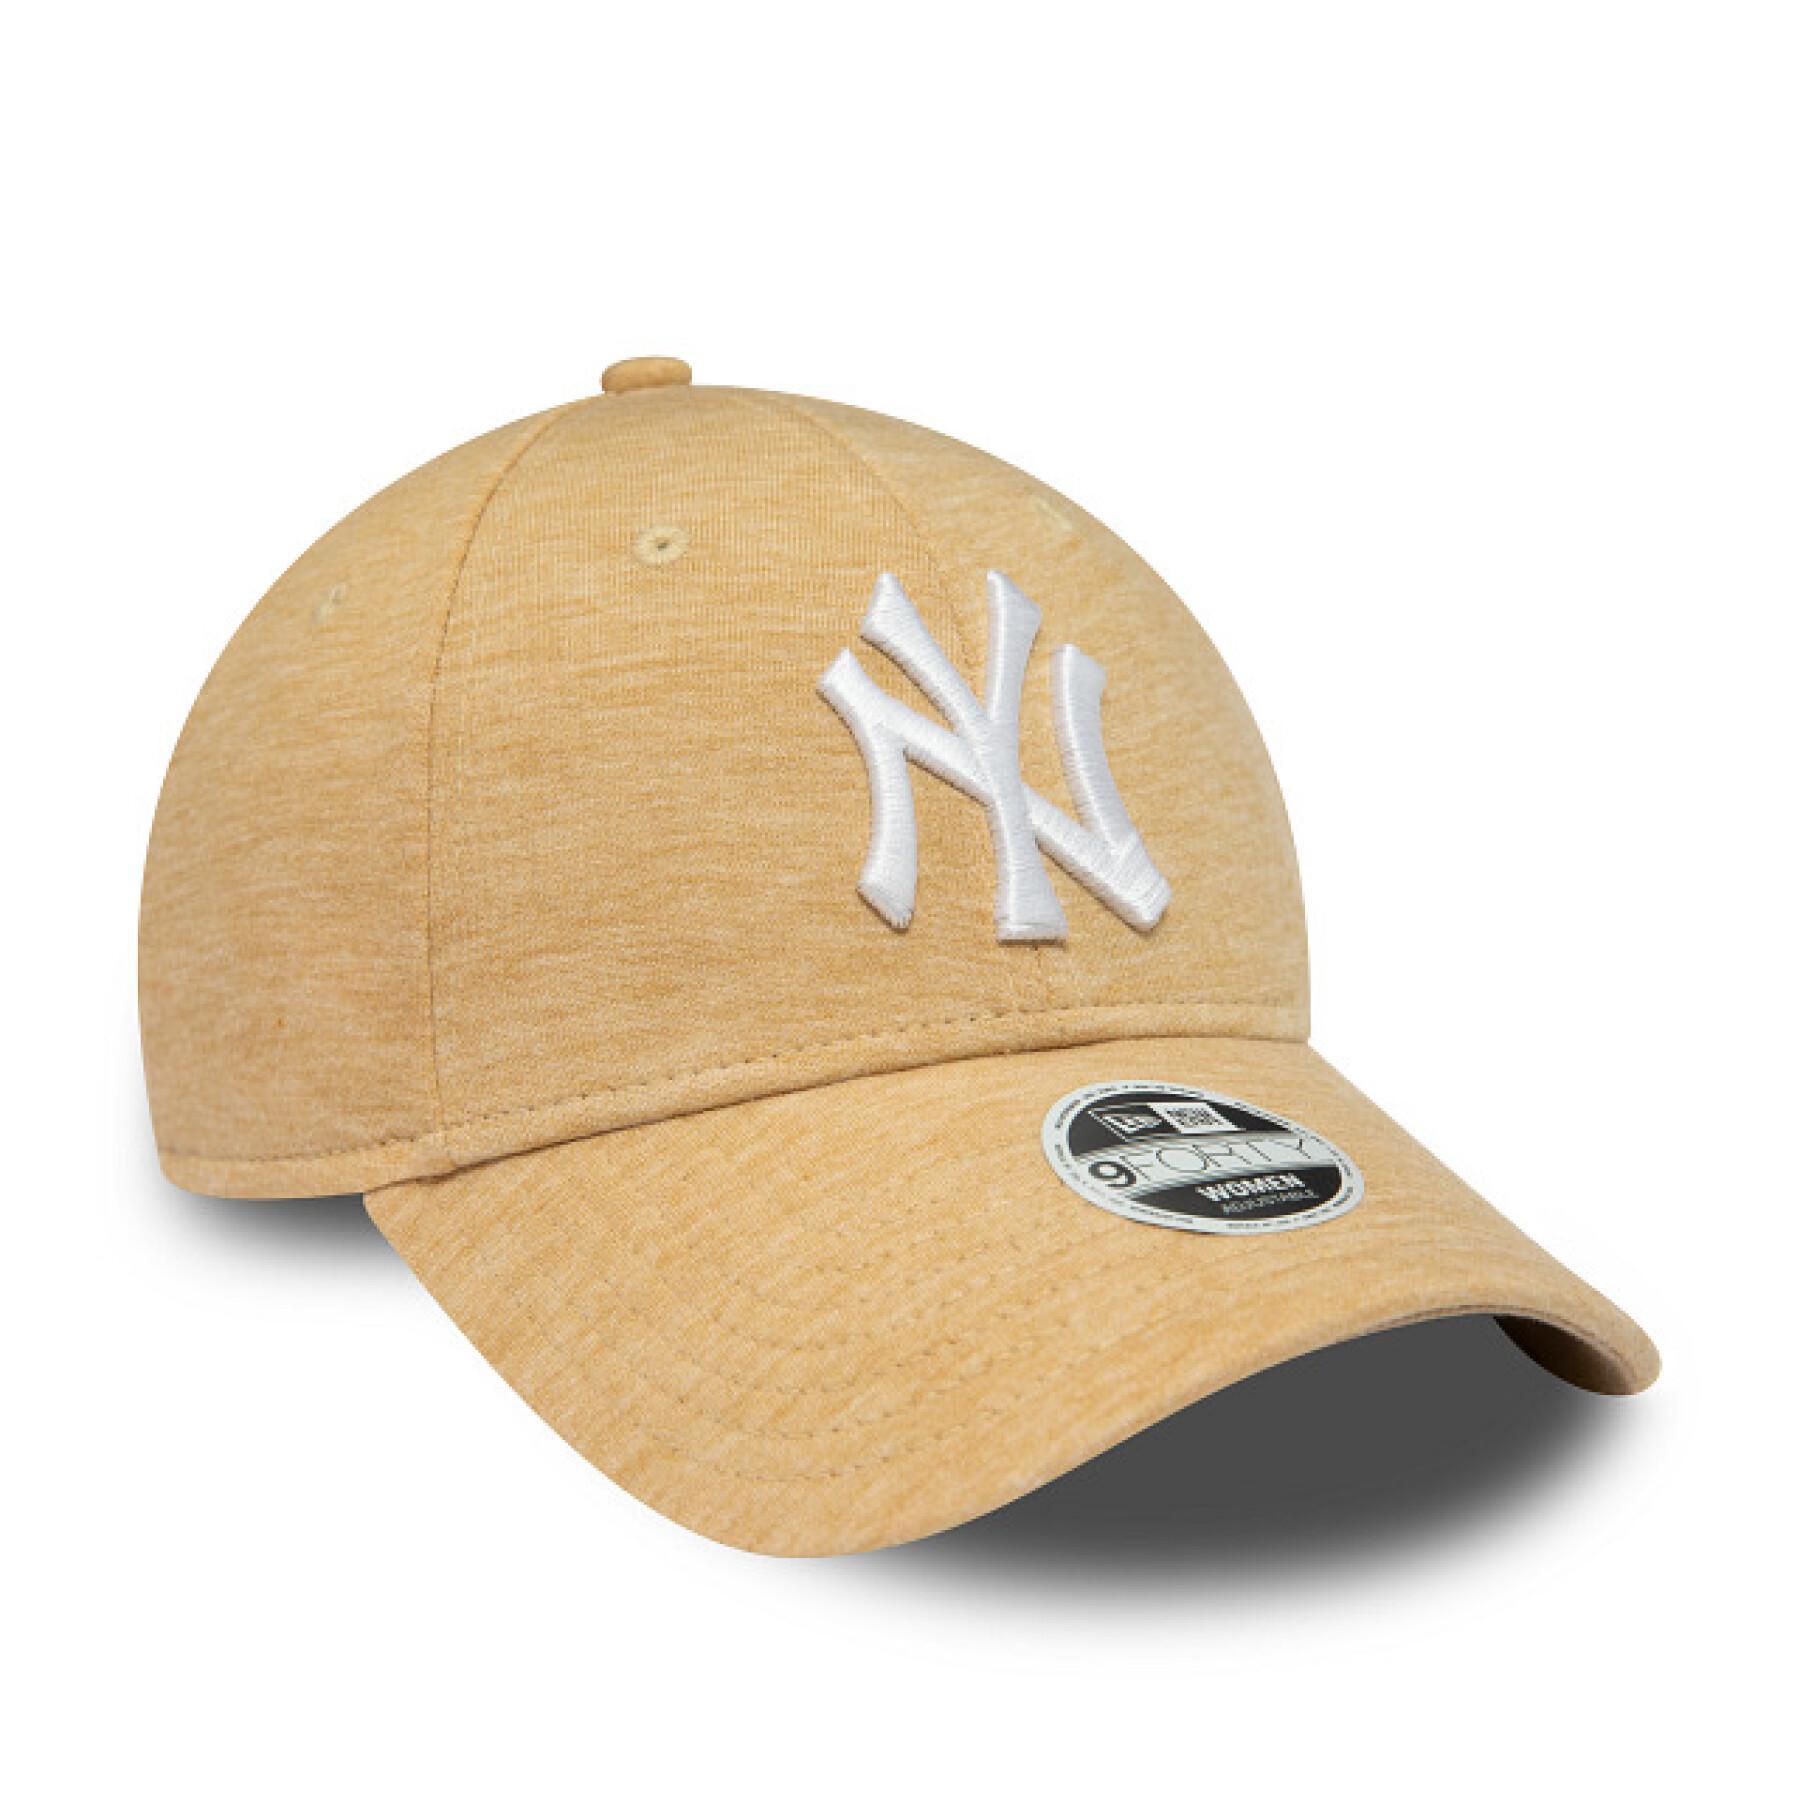 Casquette femme New York Yankees Jersey 9Forty